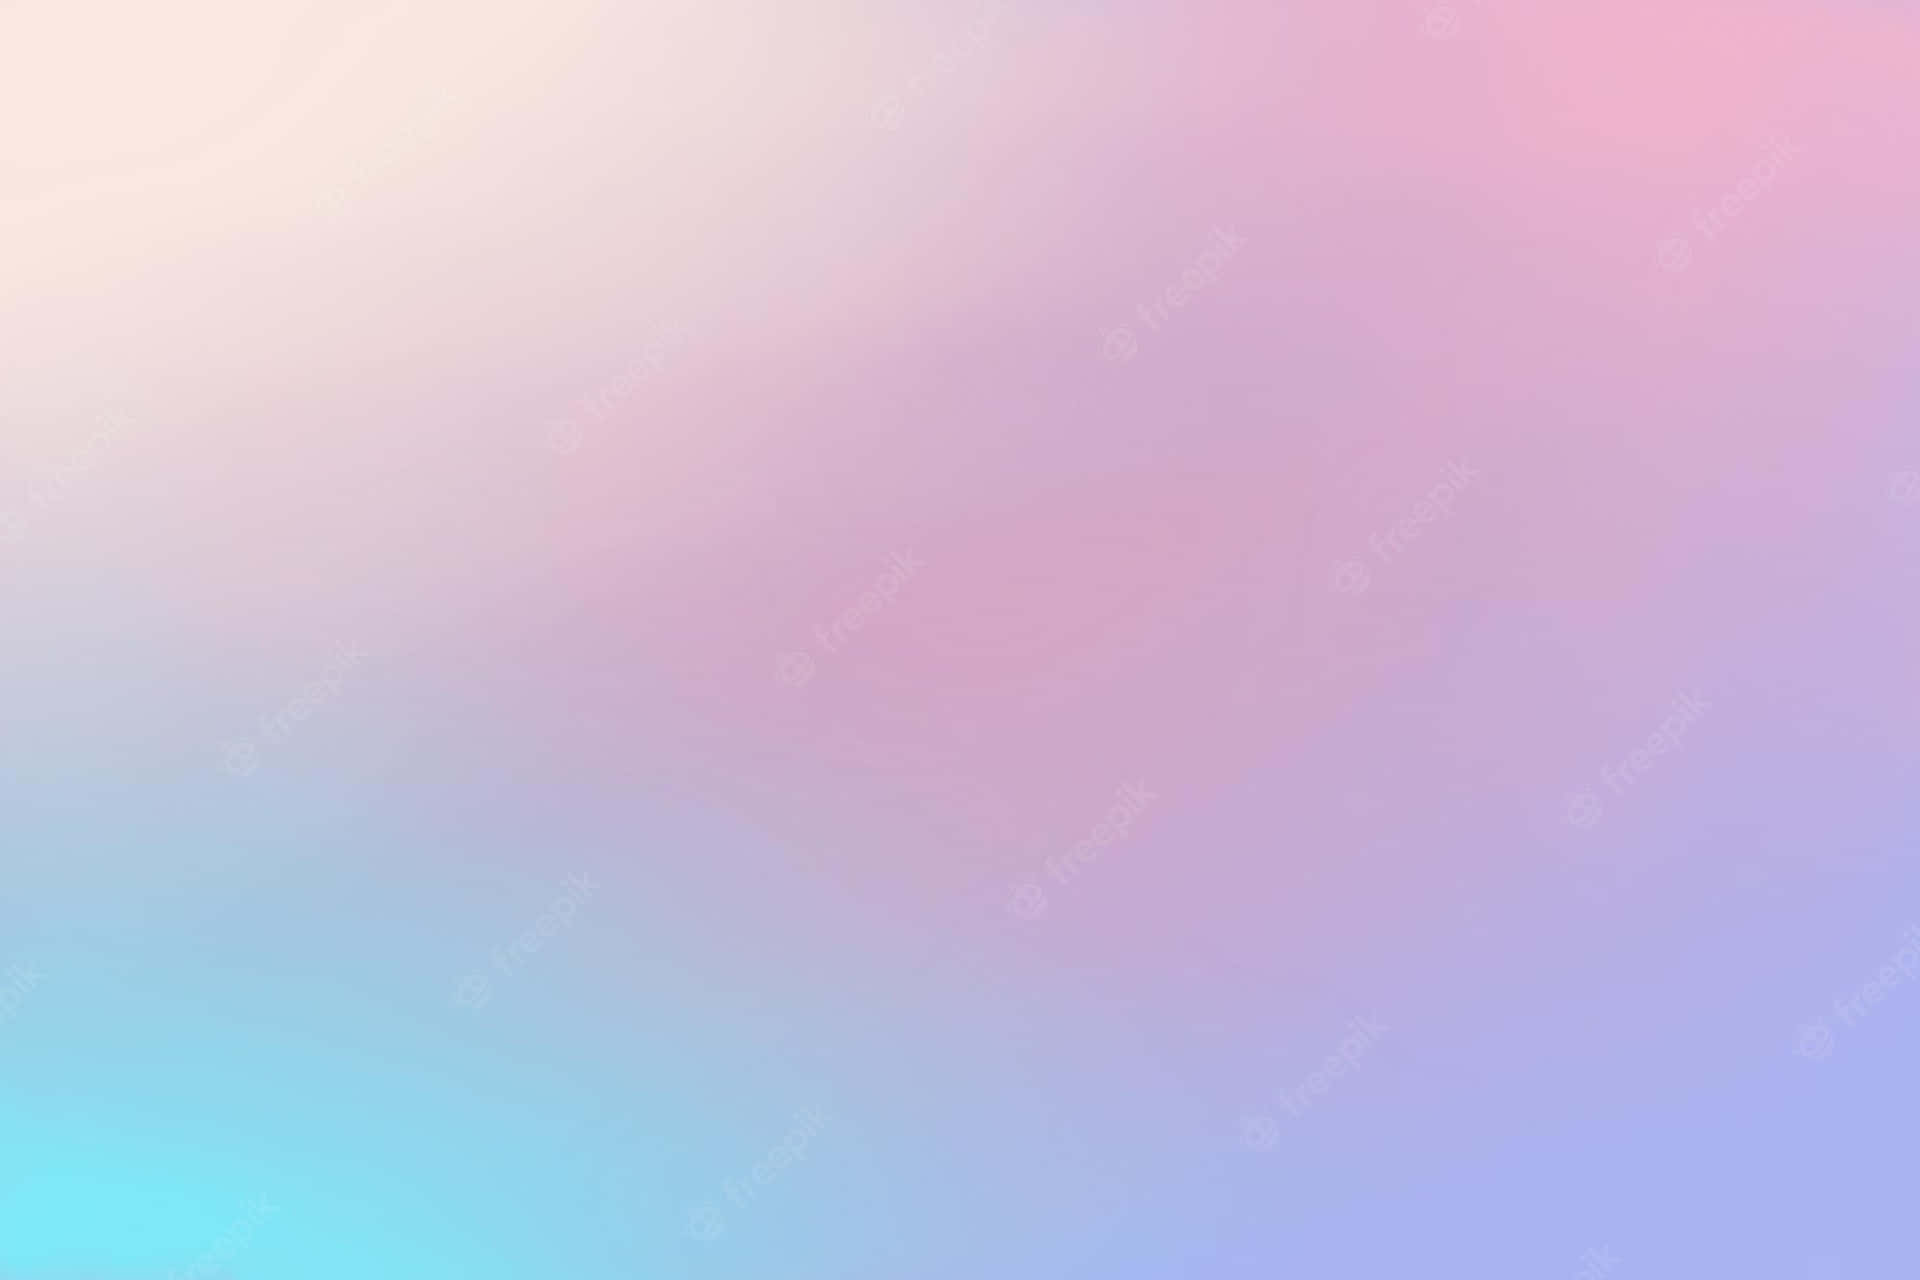 "Take a walk on the creative side with this pastel ombre wallpaper". Wallpaper